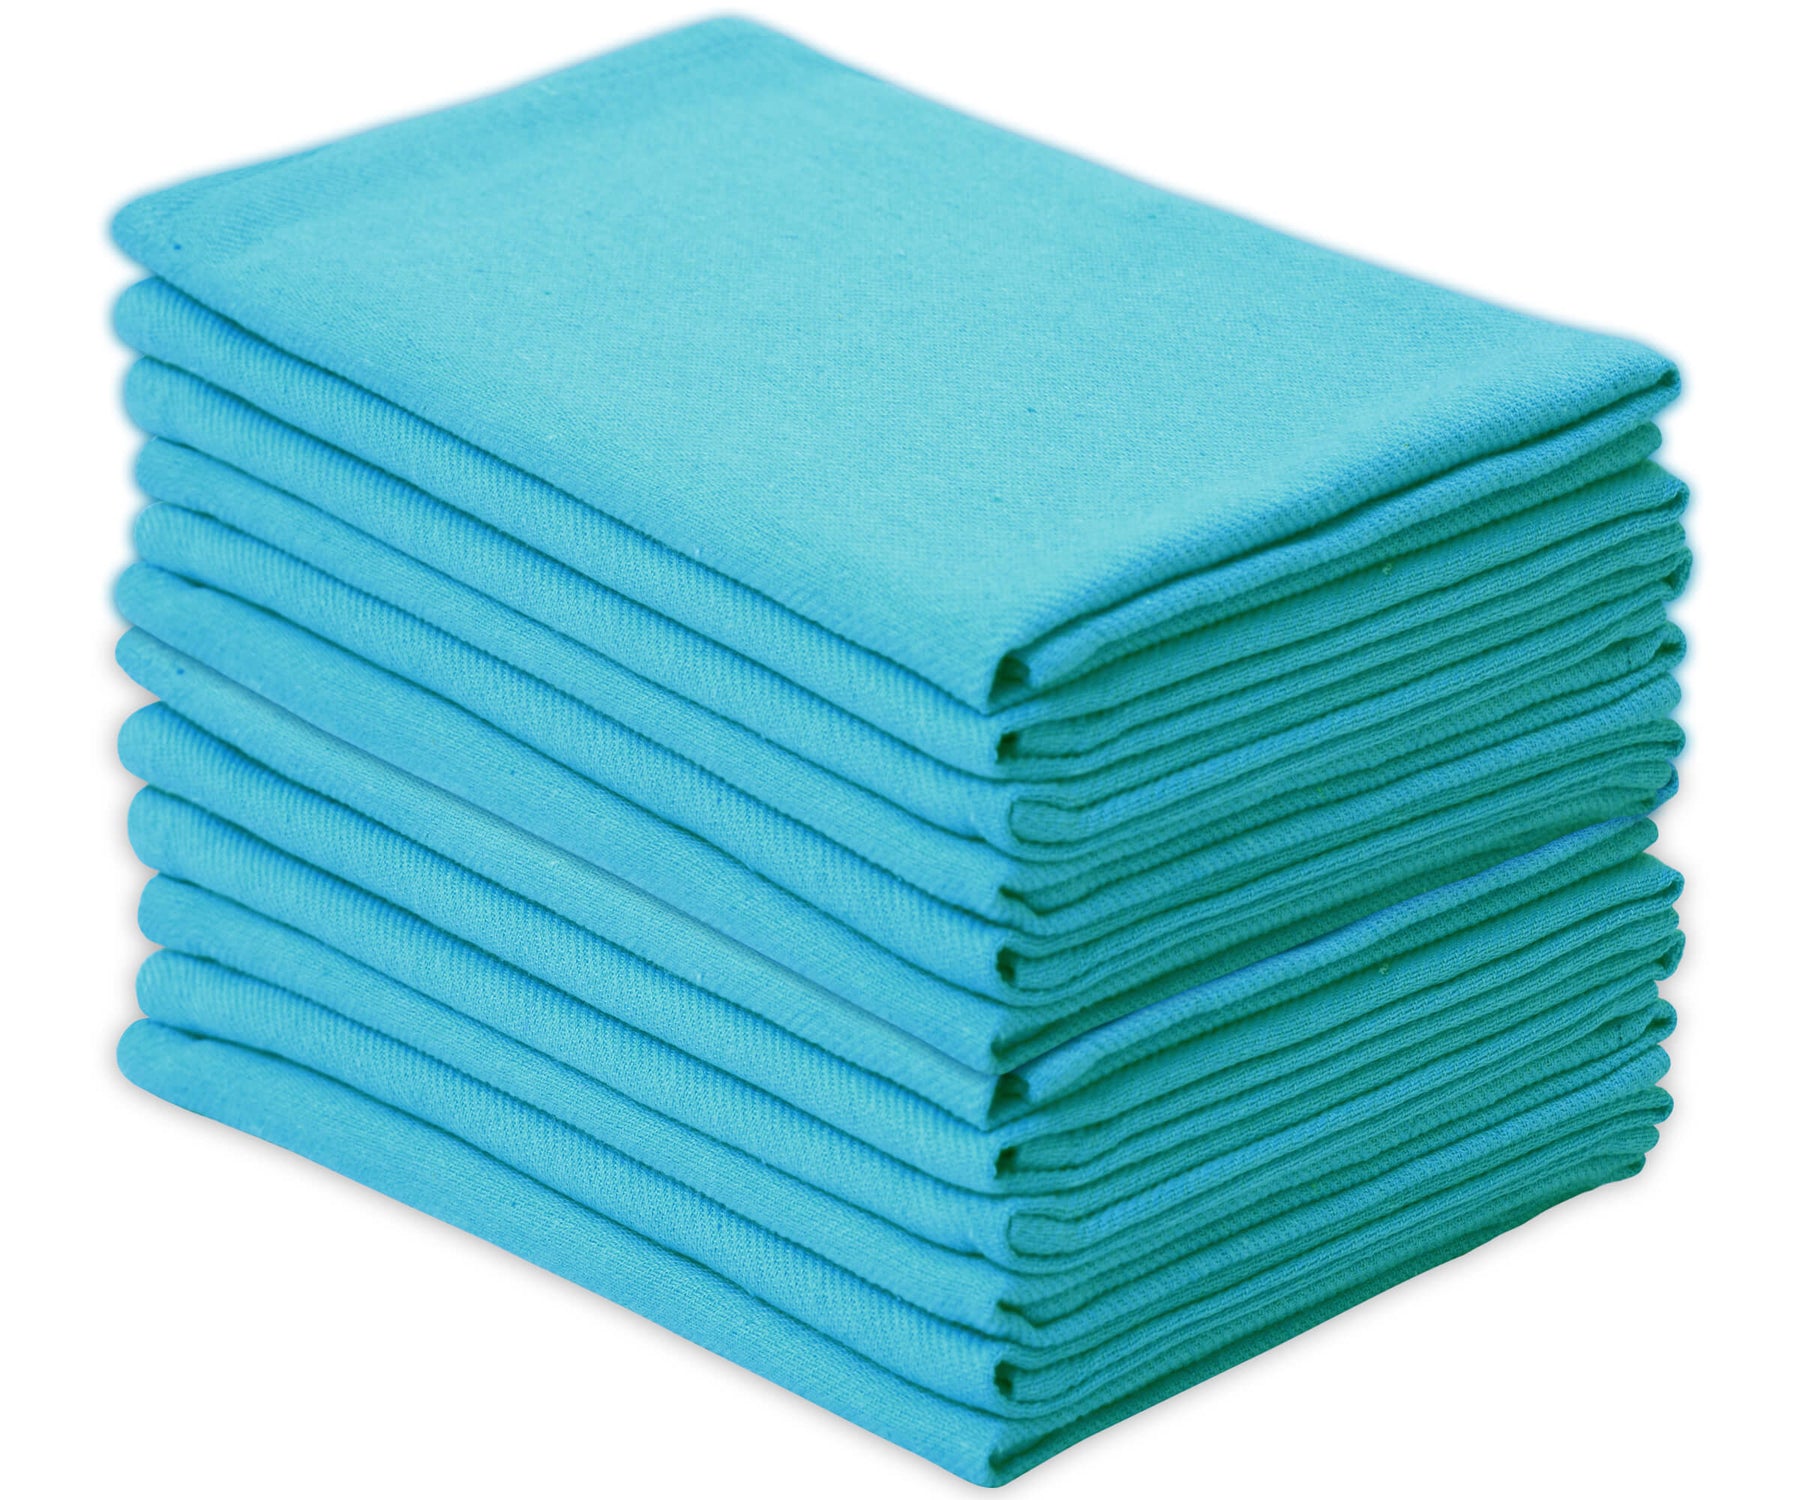 Cloth Napkins set of 6 are folded and arranged one above the other